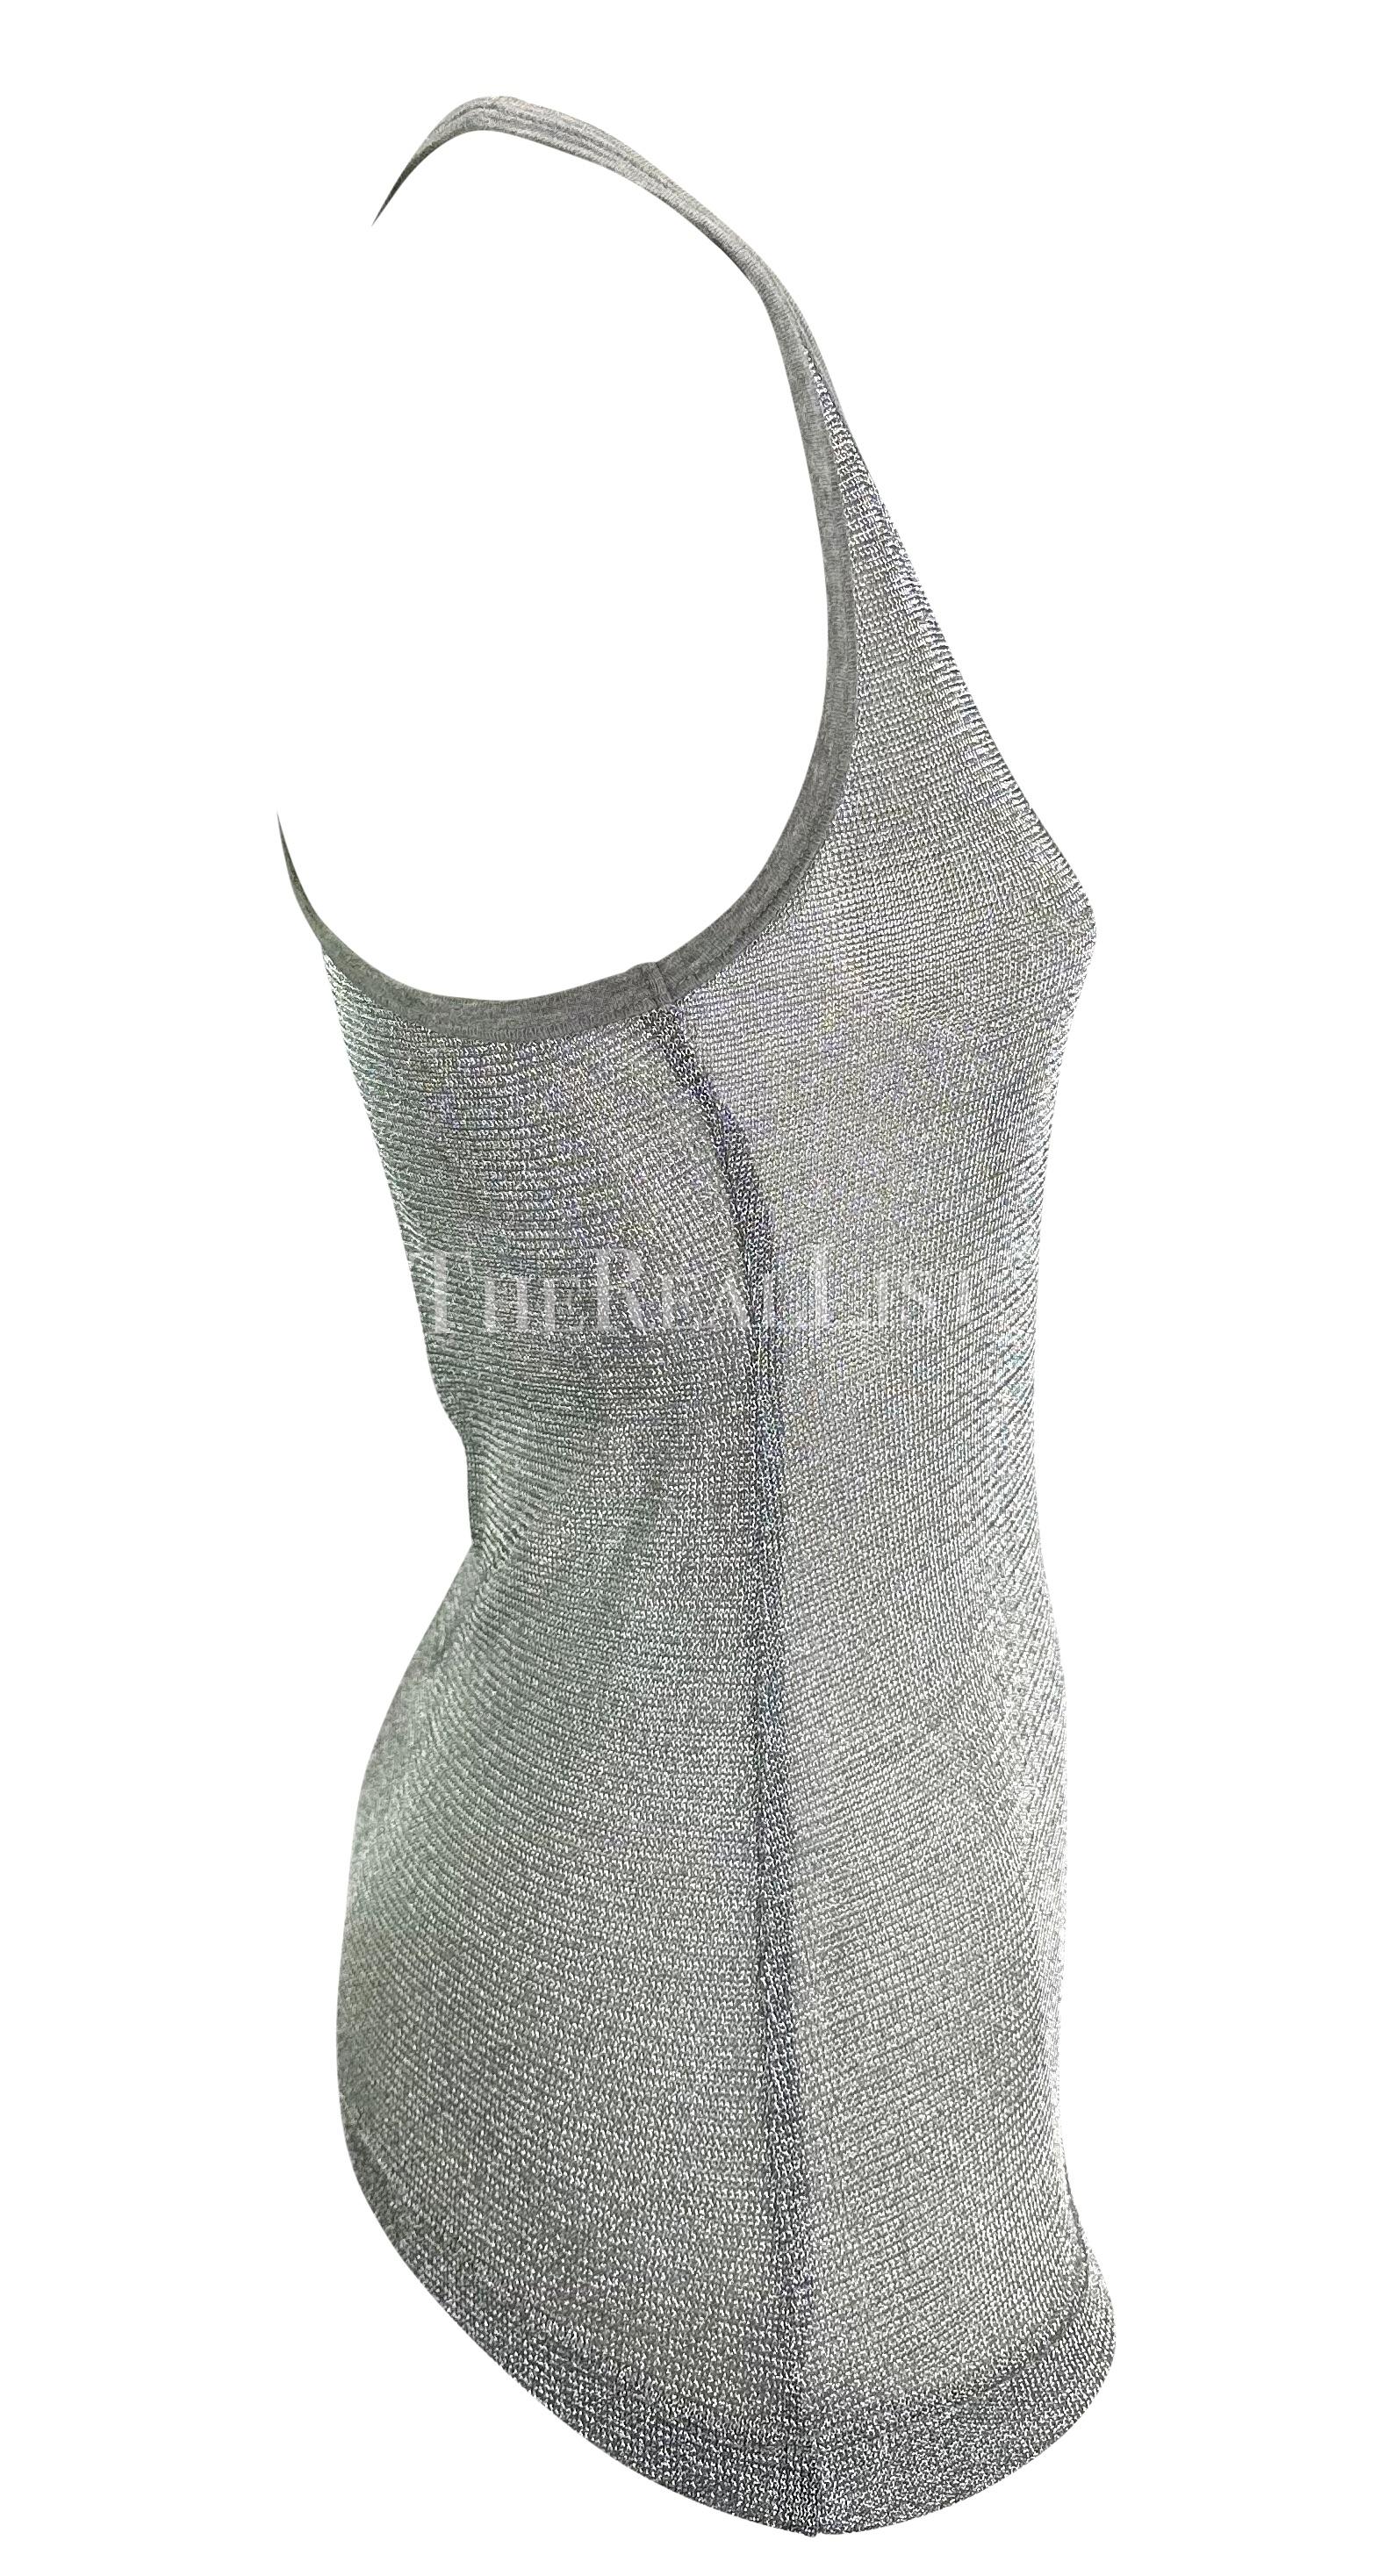 S/S 2003 Dolce & Gabbana Runway Ad Silver Woven Metal Mesh Racerback Tank Top  For Sale 5